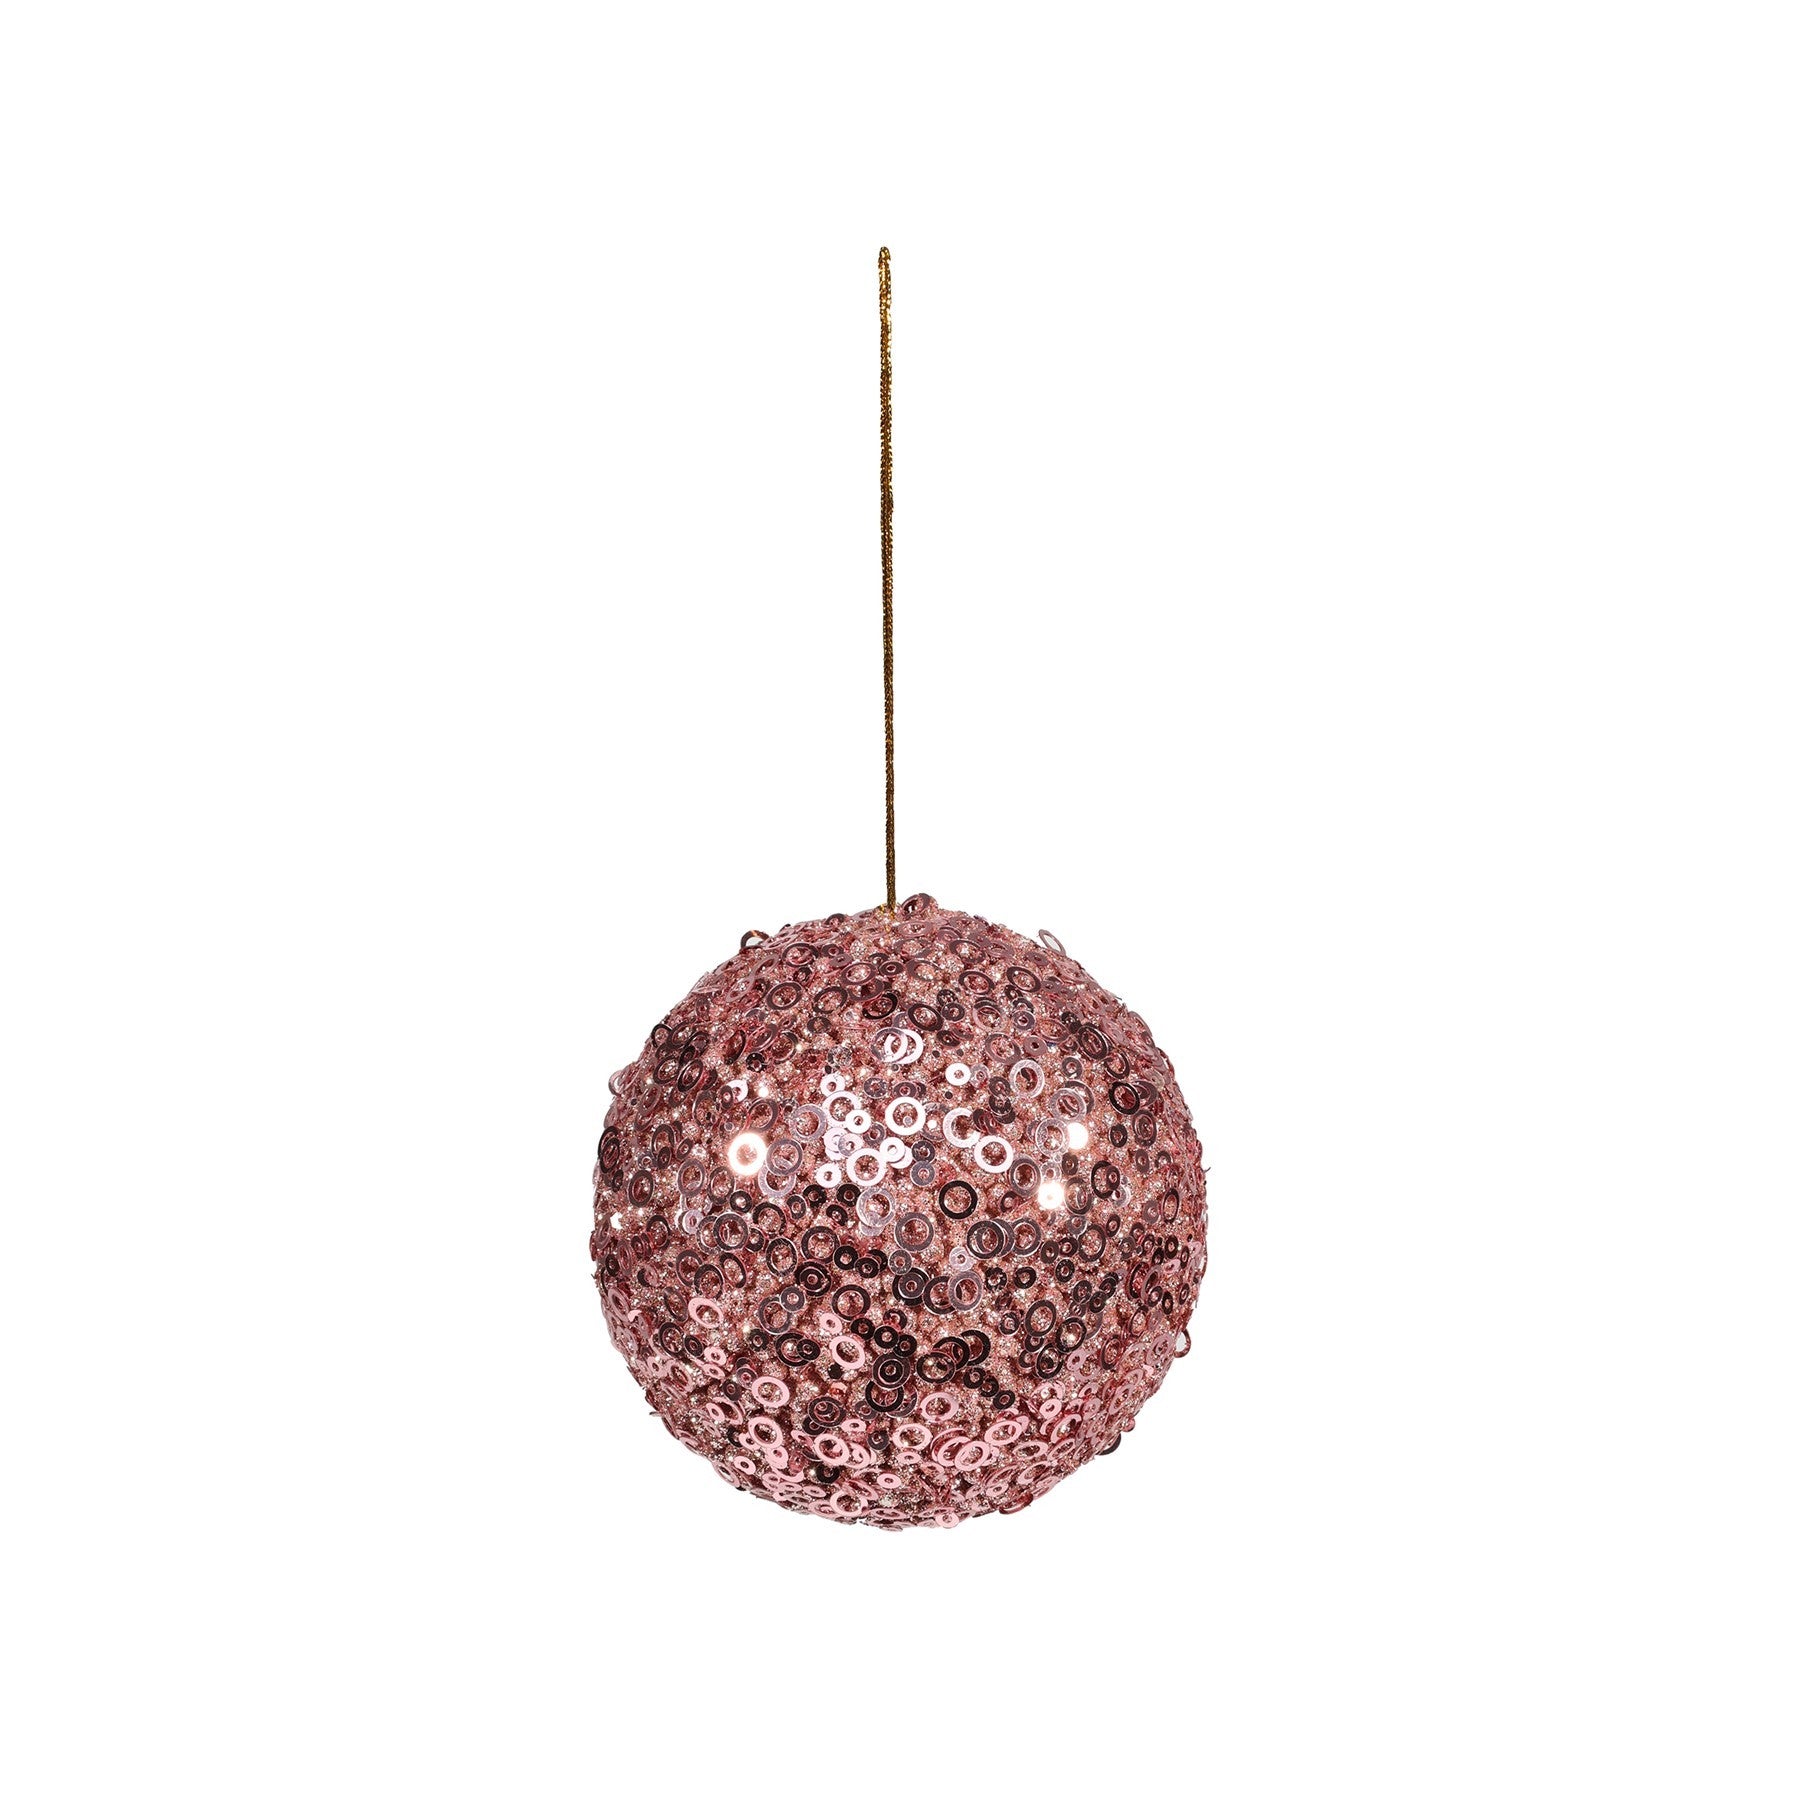 View Pretty in Pink Glitter Bauble Dia10cm information